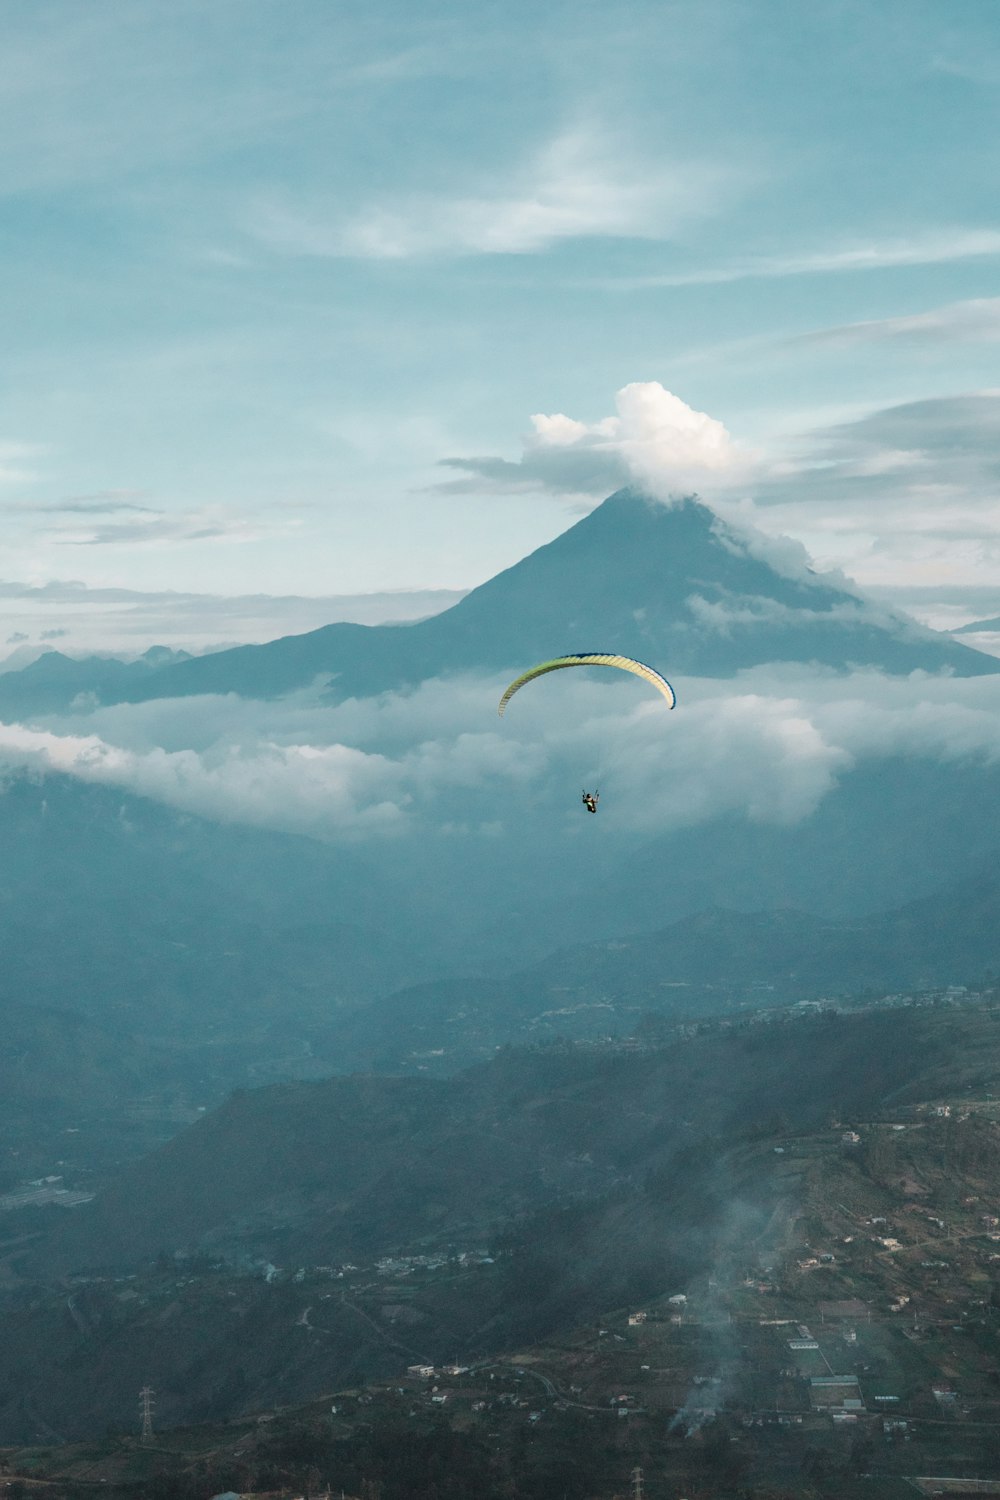 a paraglider flying over a city below a mountain